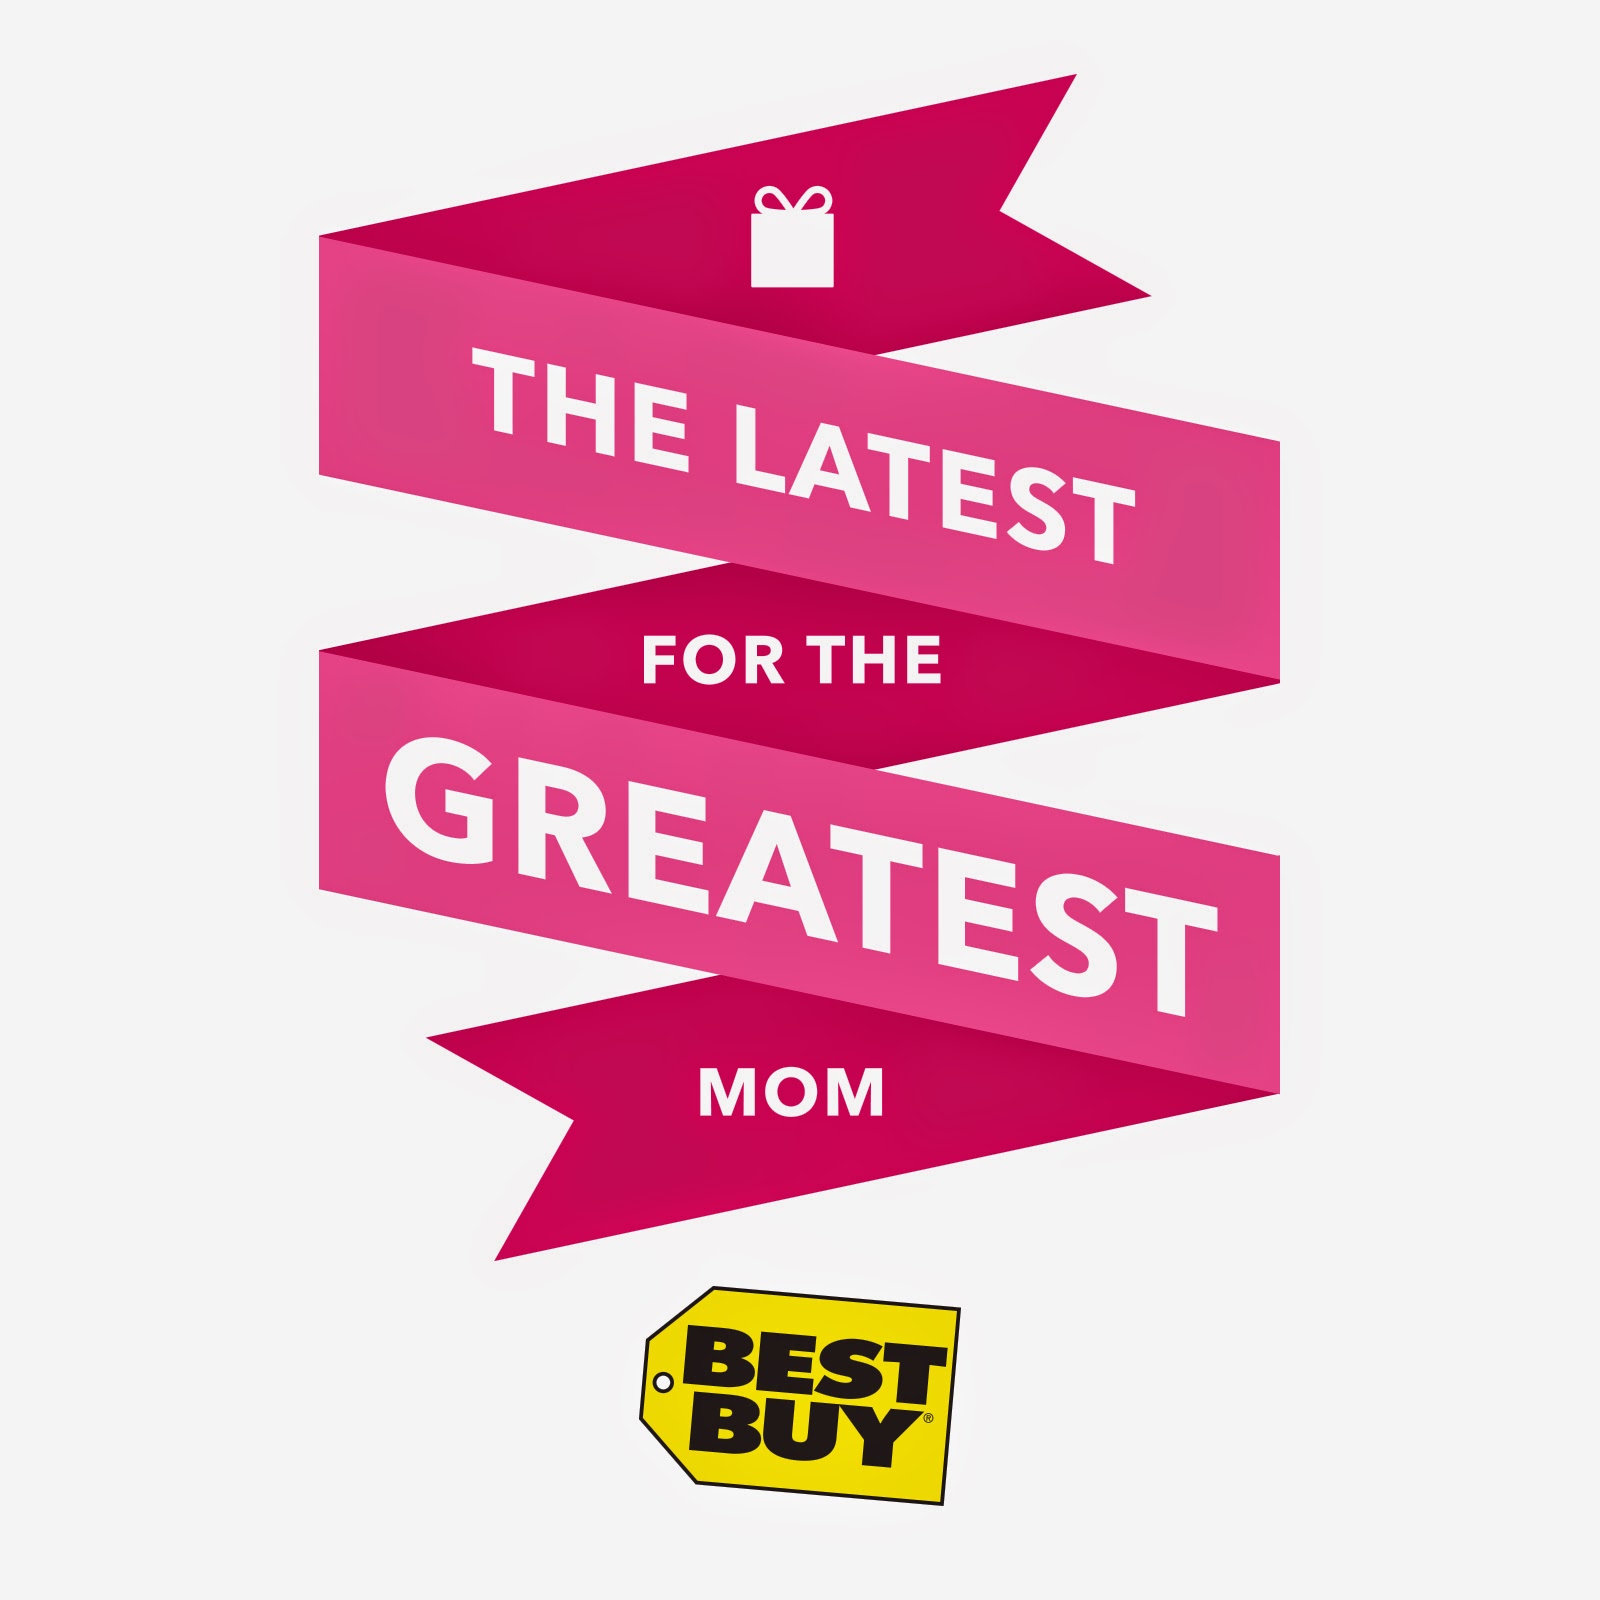 The Latest and Greatest for Mom at Best Buy